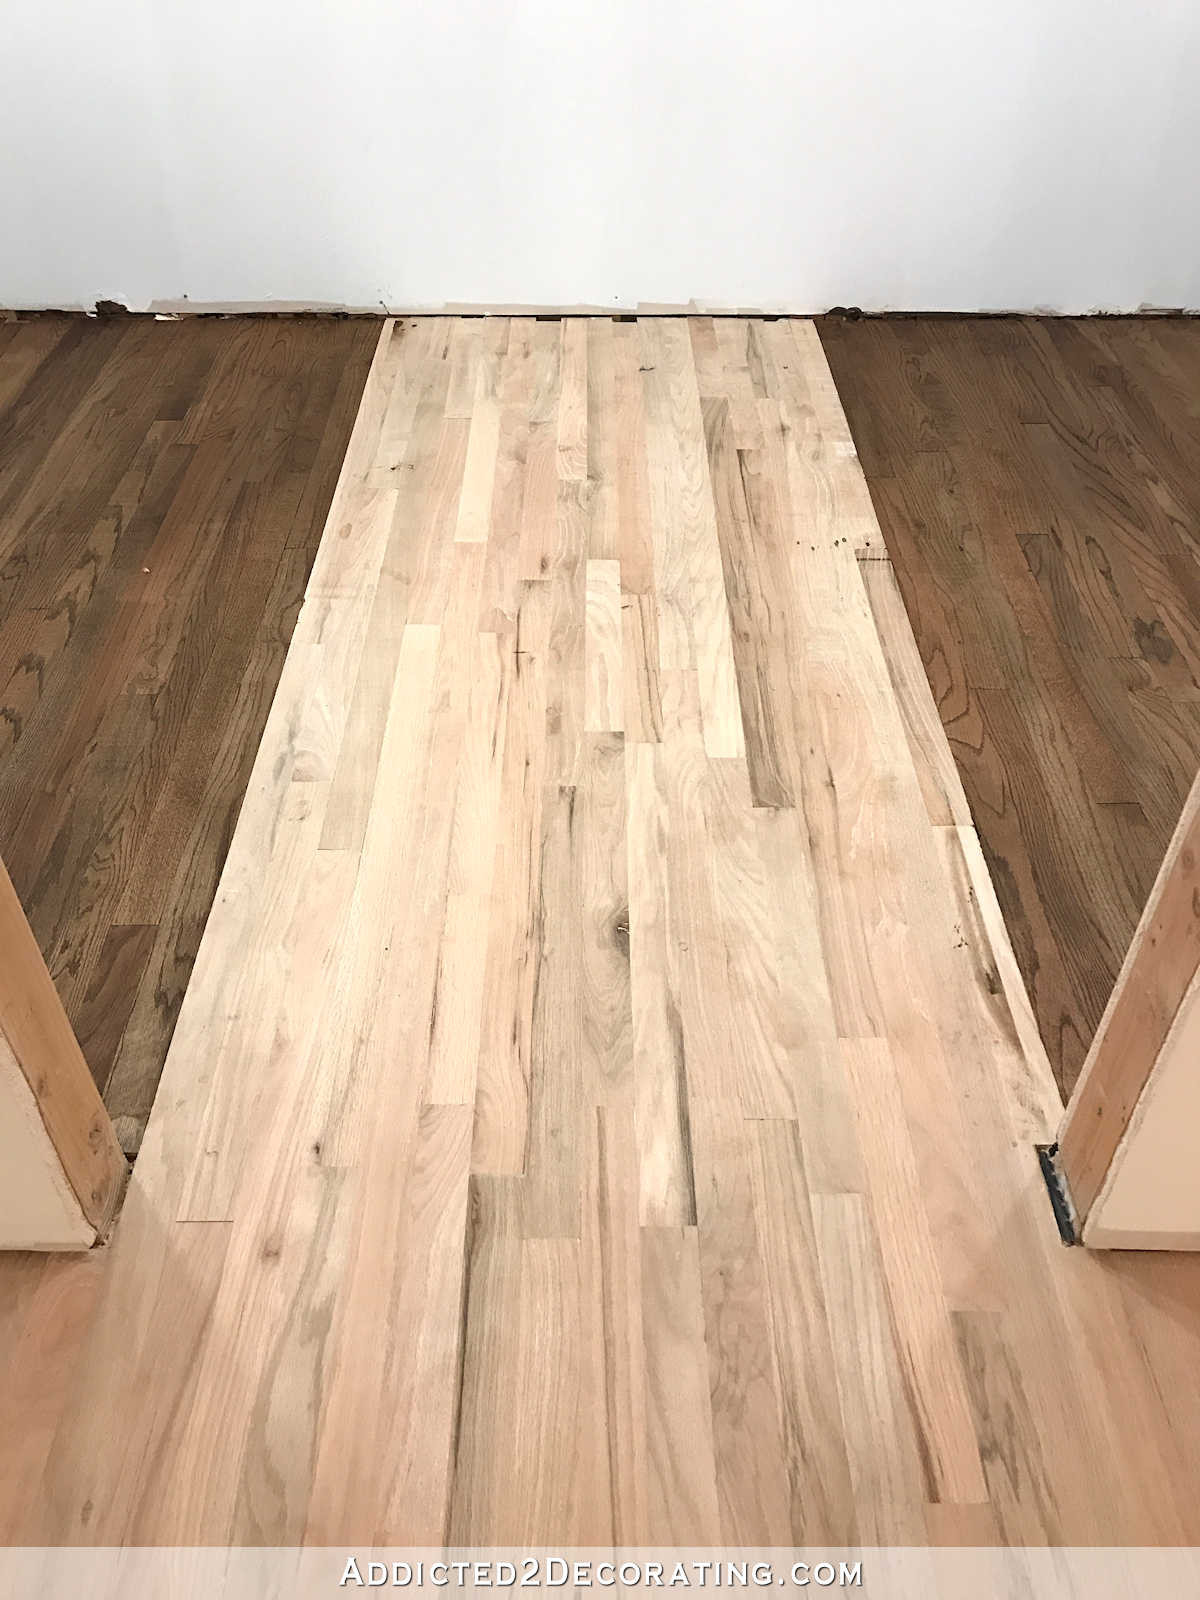 Oak Hardwood Flooring Colors Of Adventures In Staining My Red Oak Hardwood Floors Products Process Pertaining to Staining Red Oak Hardwood Floors 11 Stain On Left and Right Sides Of the